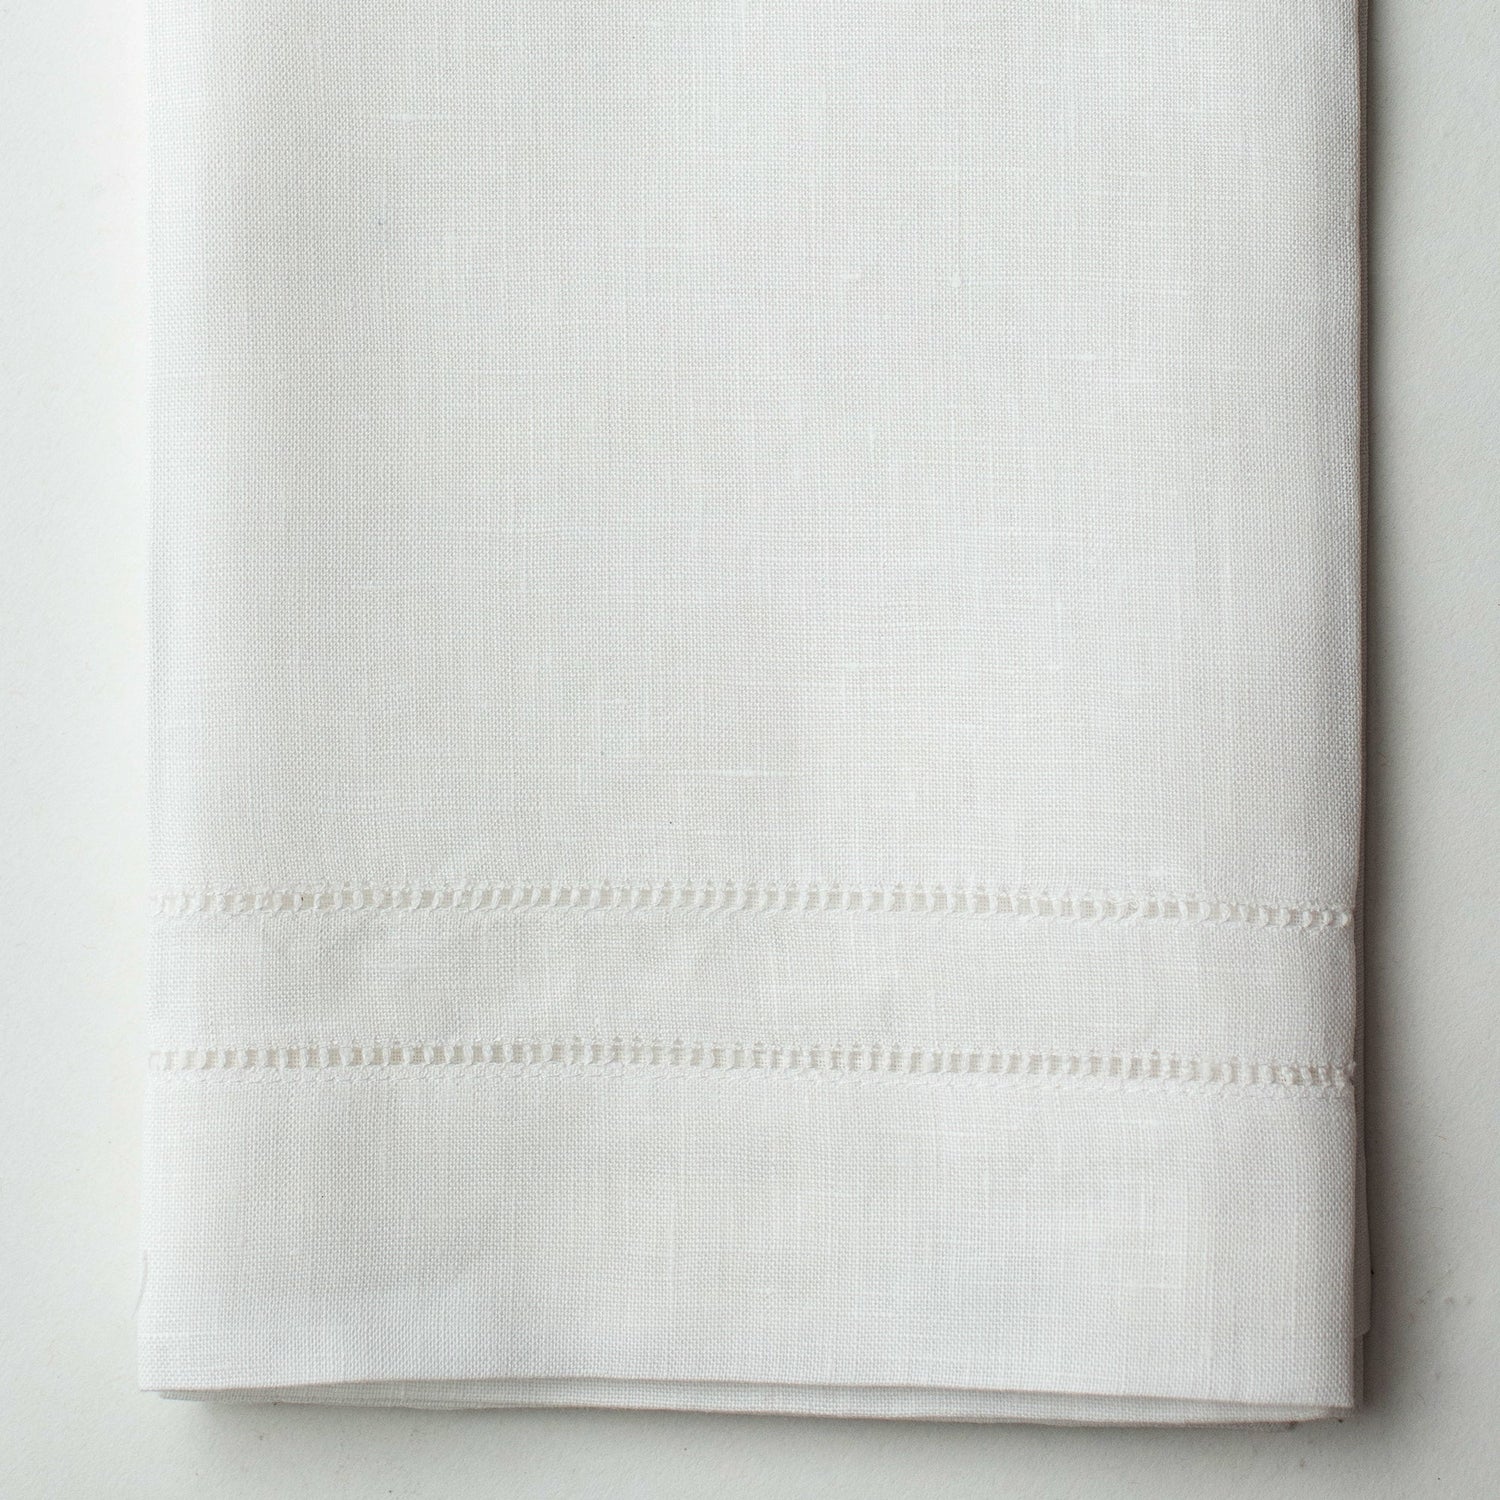 A close up of a white linen hand towel with a hemstitch border